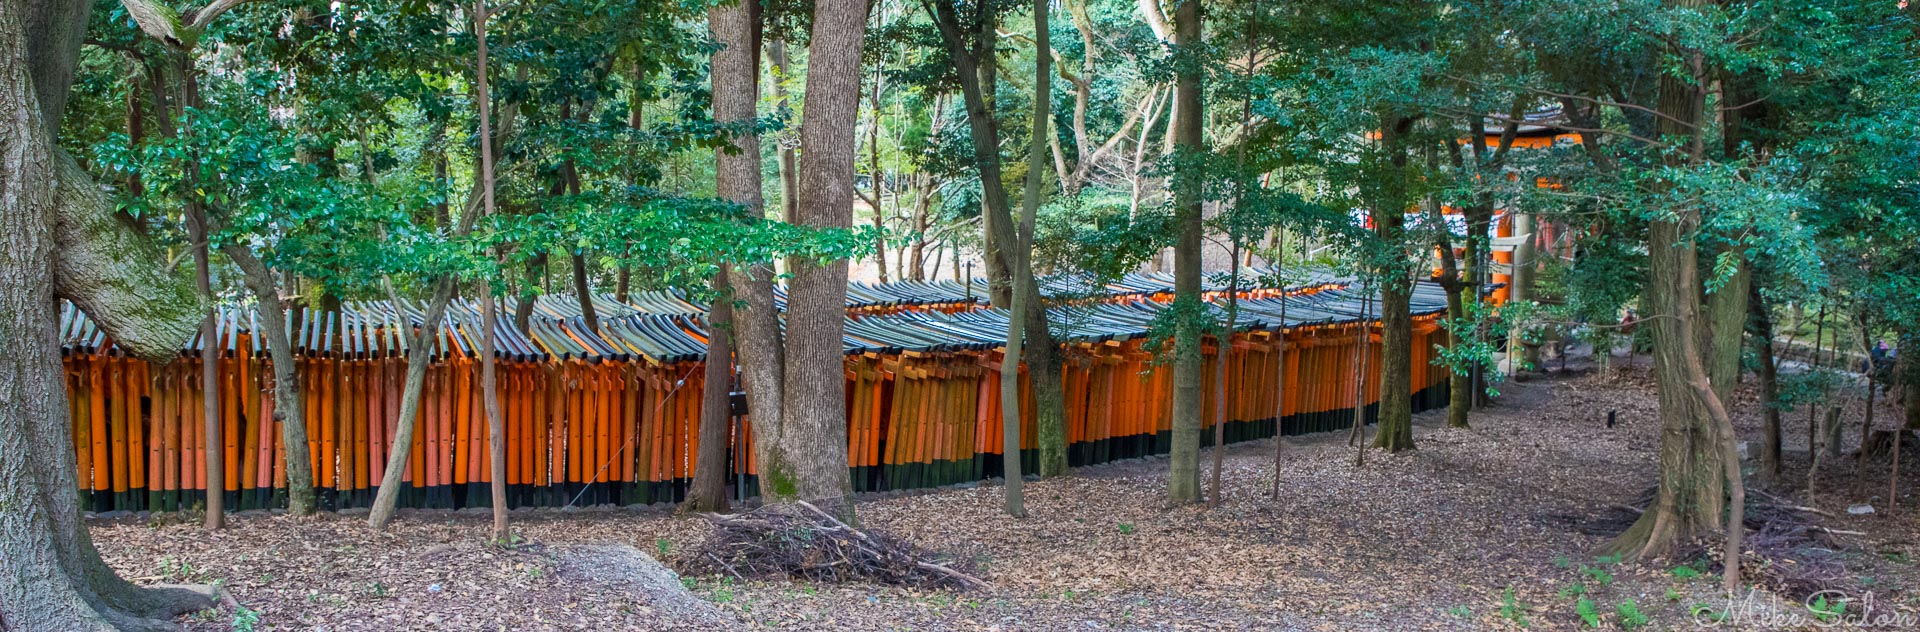 Patron of Business : Panoramic glimpse of some of 10,000 gates in the Fushimi Inari shrine in Kyoto. (0D0A7848.jpg)<br>Camera: Canon EOS 5D Mark IV